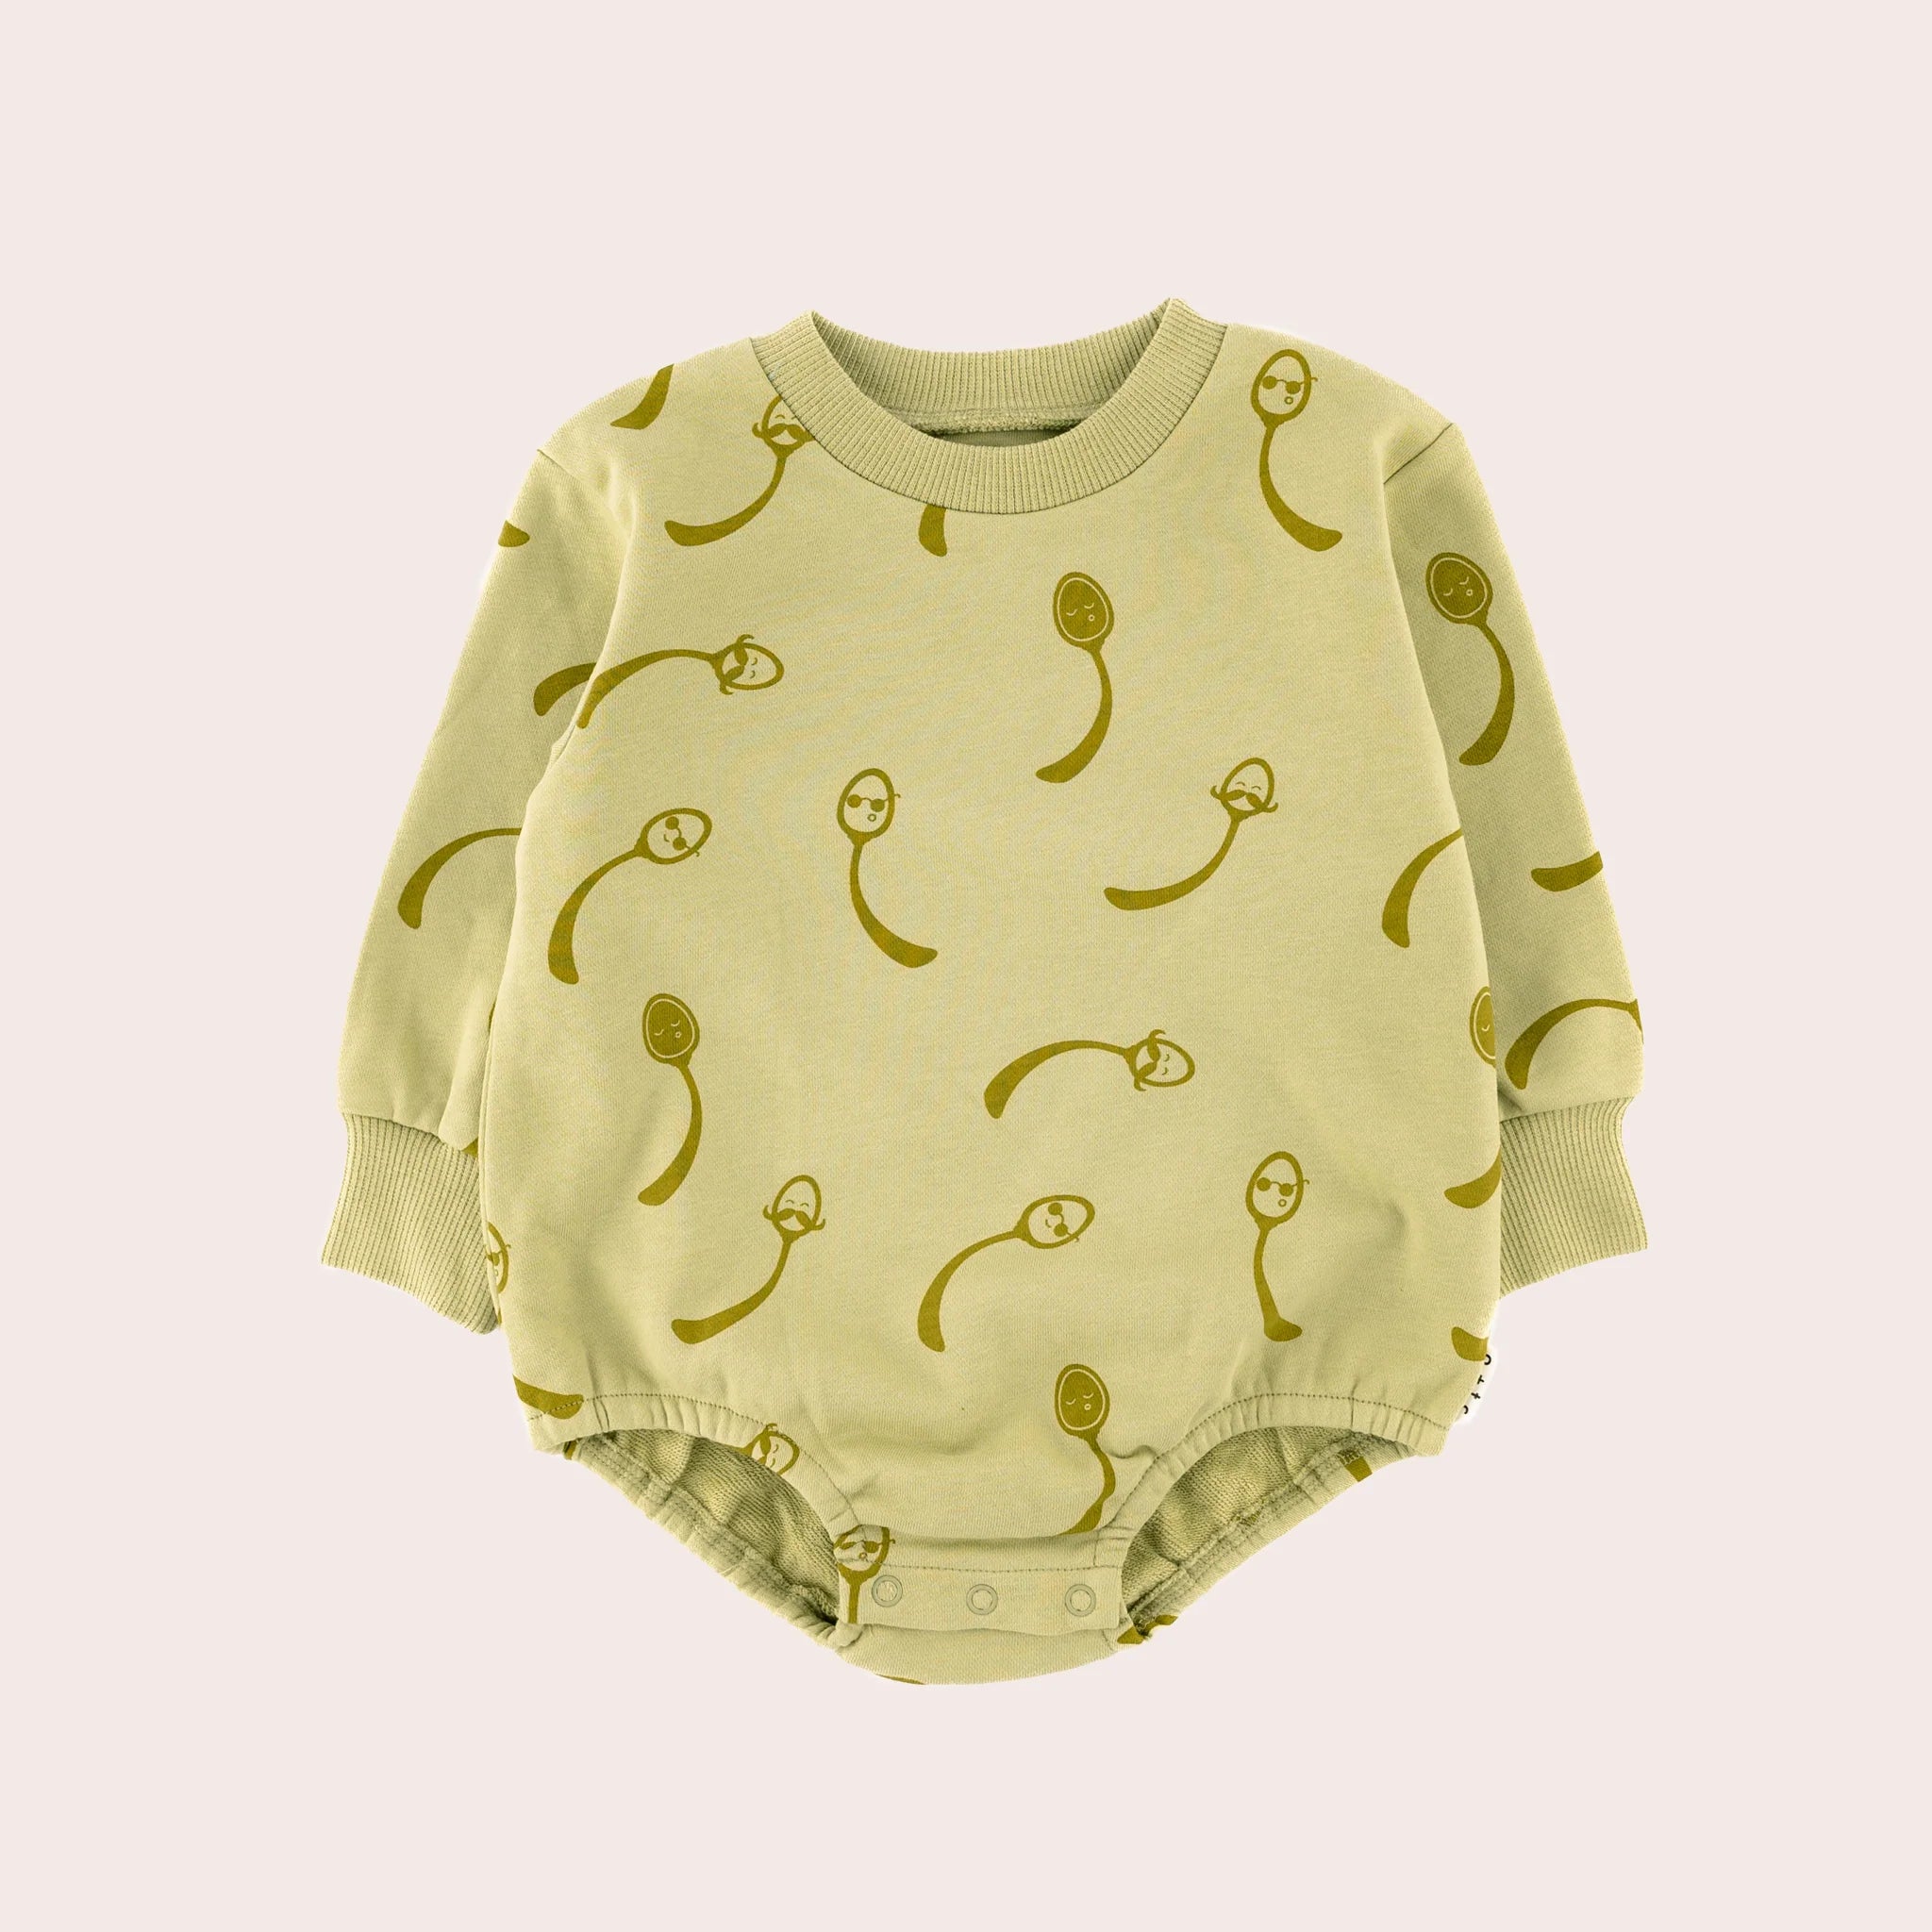 Olive and The Captain Superpowers Sweater Romper - Celery